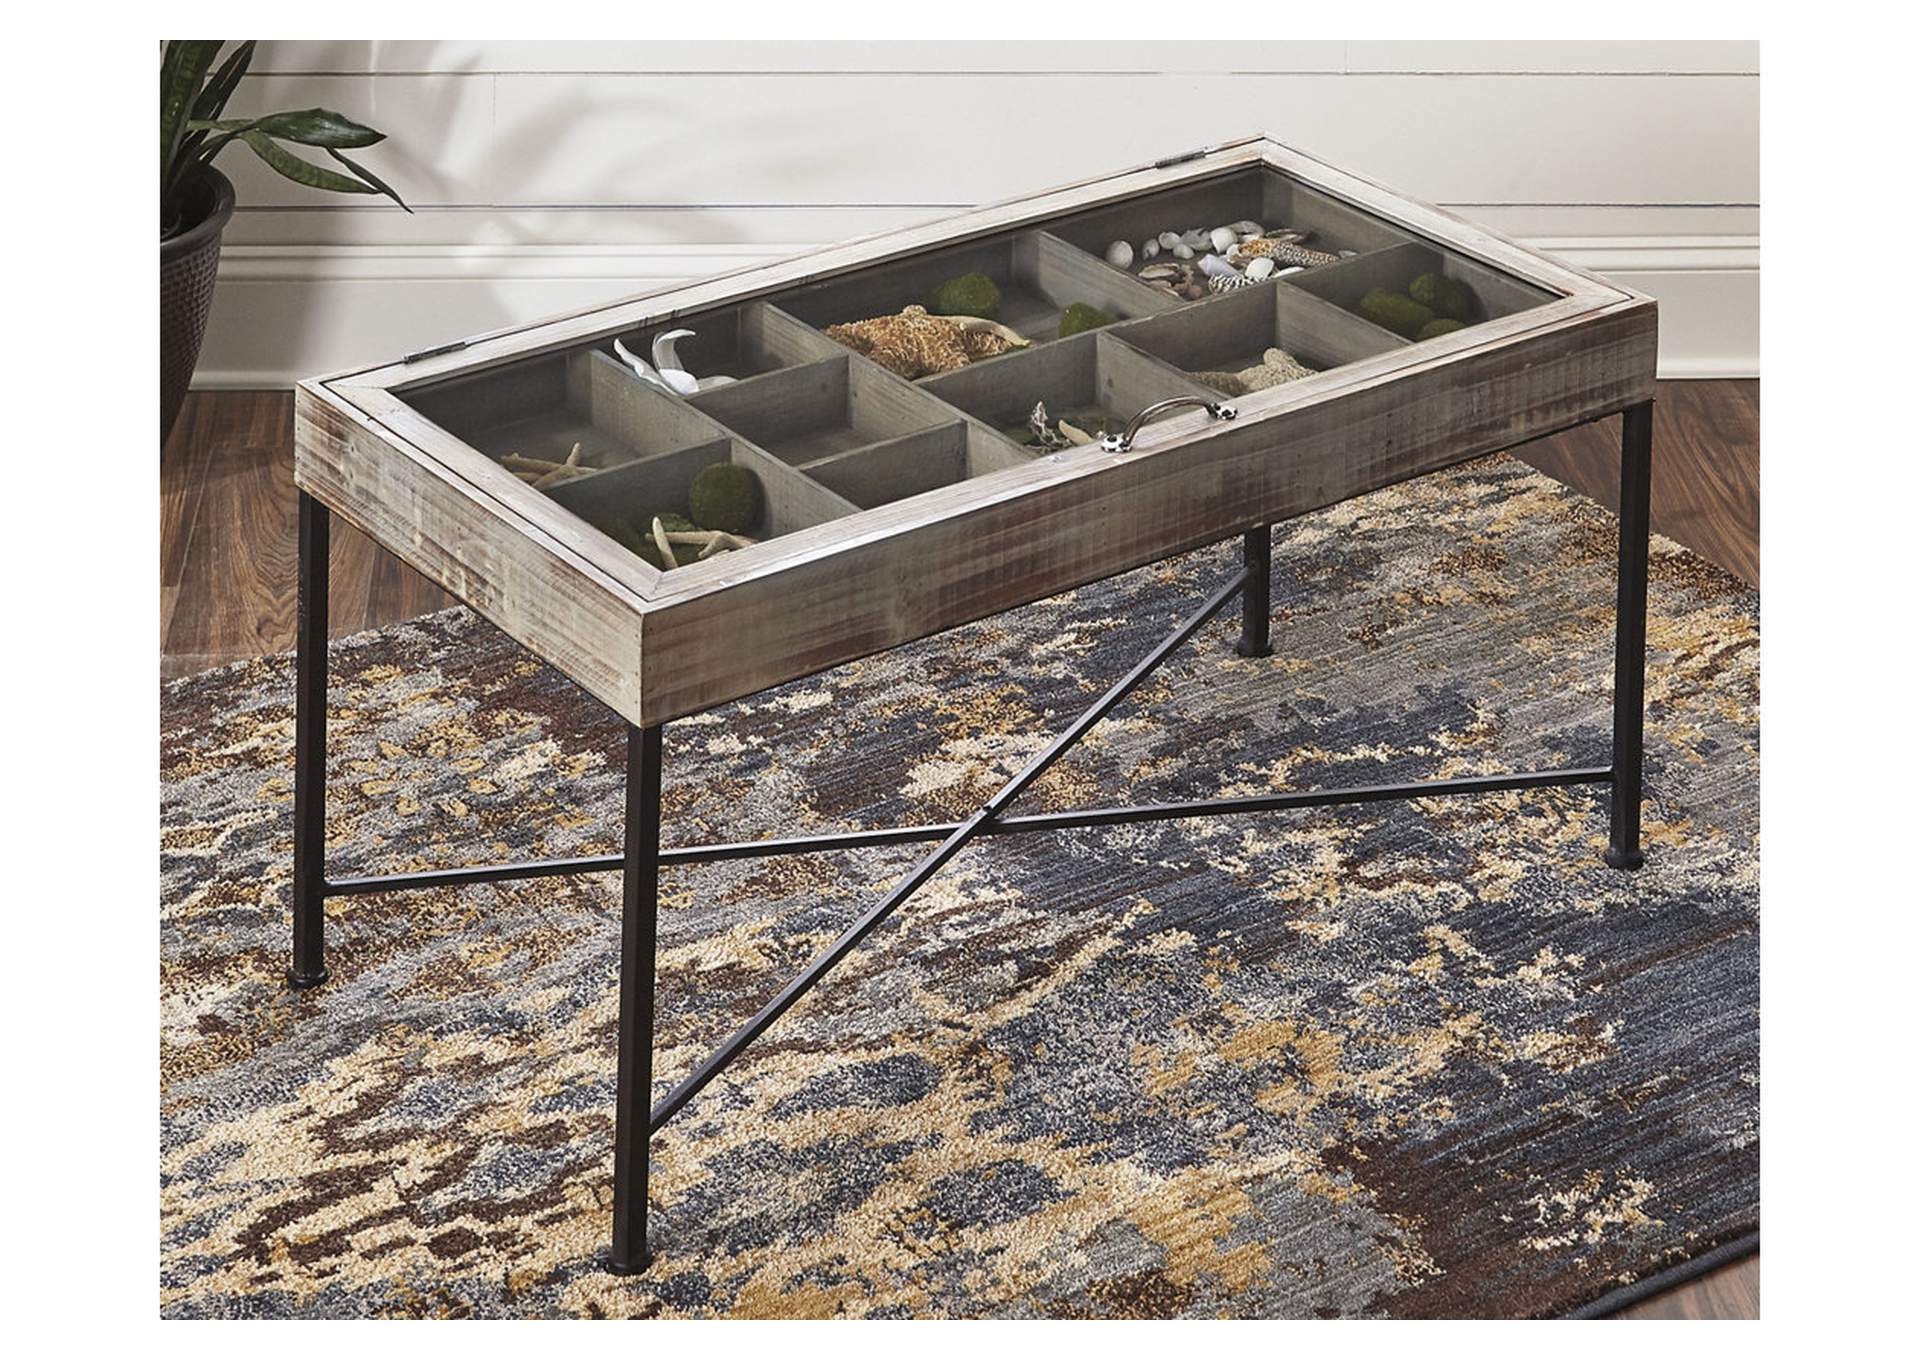 Shellmond Coffee Table with Display Case,Direct To Consumer Express